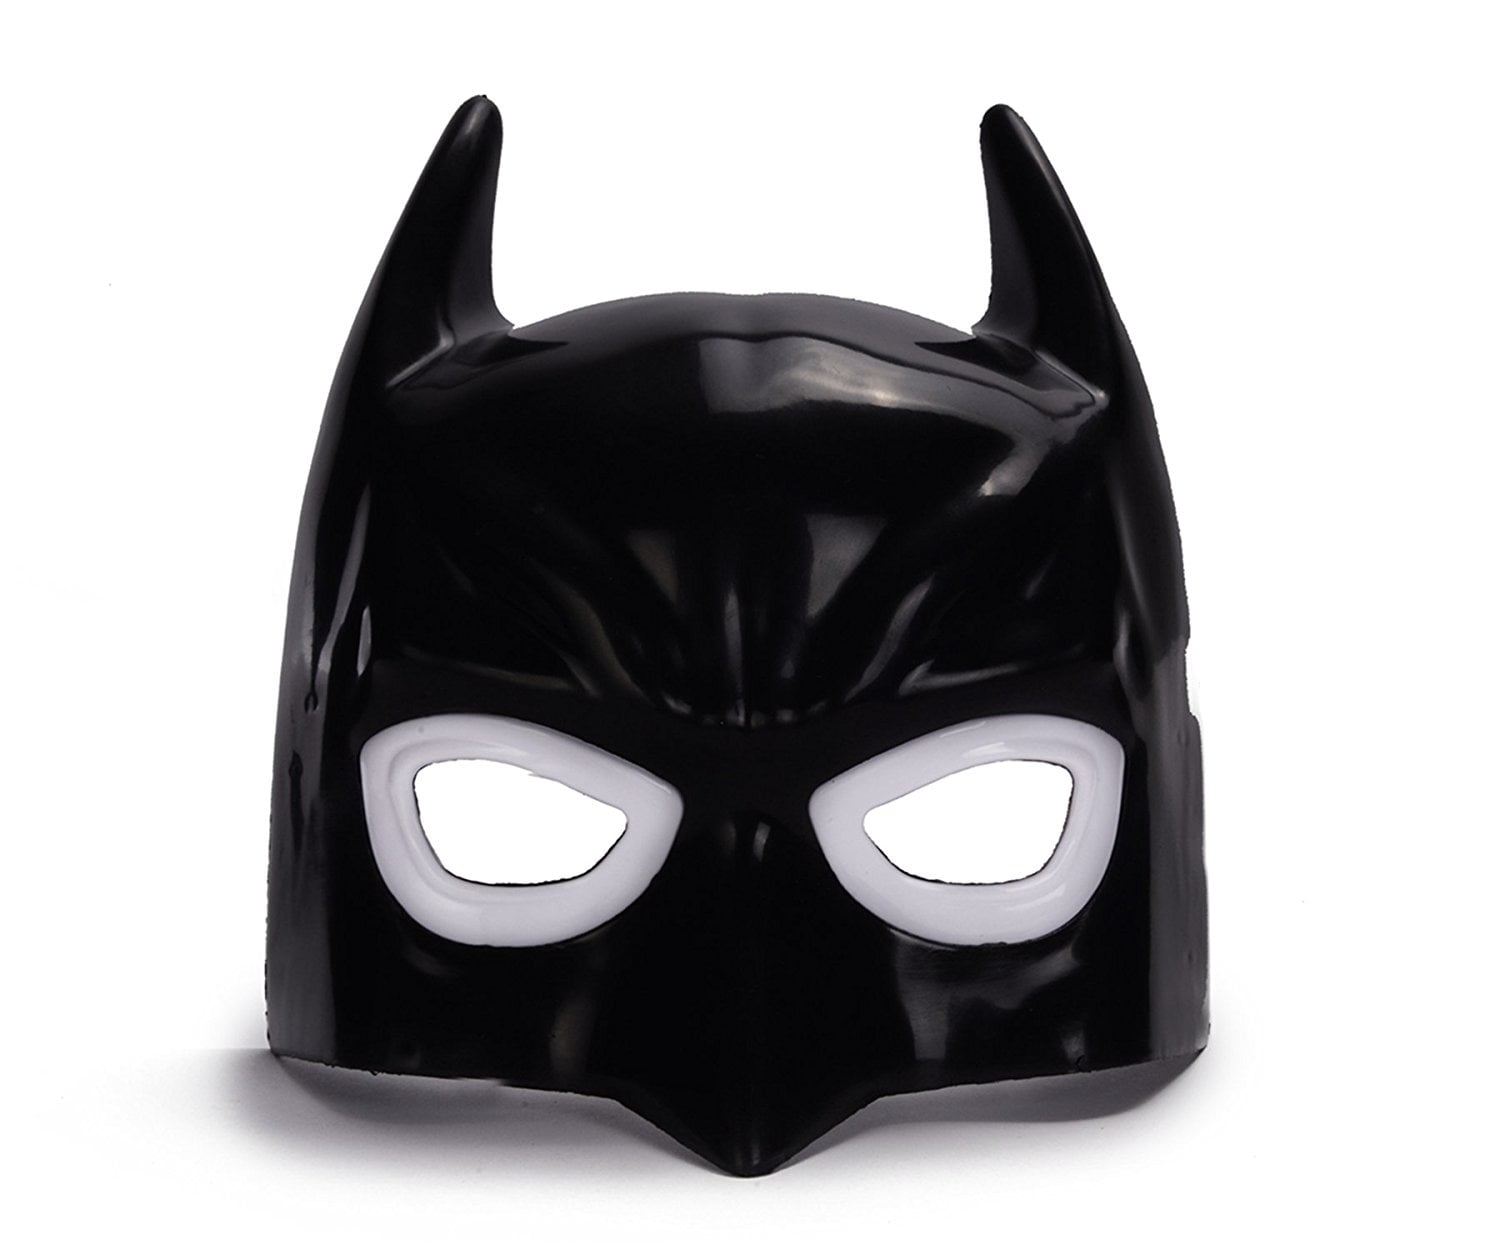 Batman Light Up LED Mask Adult Masquerade Party Halloween Cosplay Costume Mask 